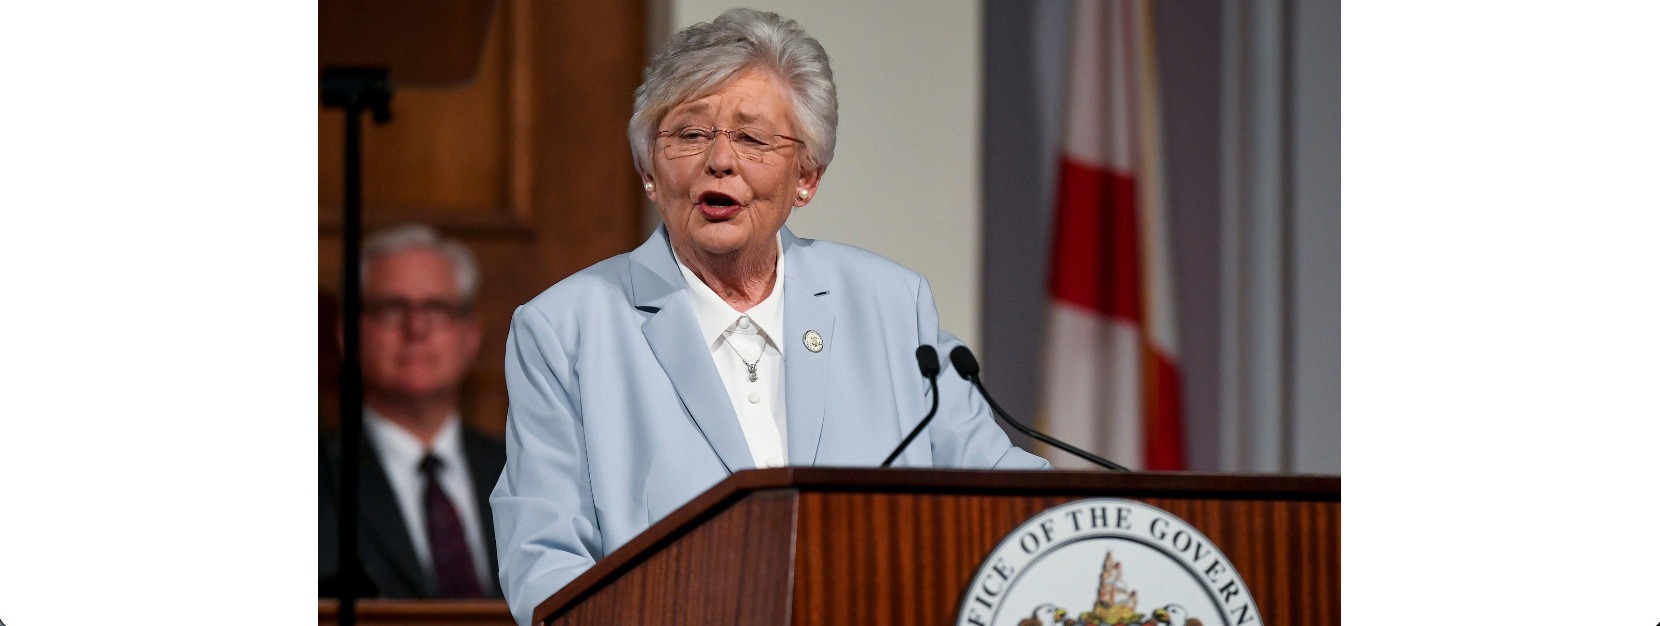 governor-ivey-confirms-rebate-checks-on-the-way-to-1-9m-alabama-tax-filers-huntsville-business